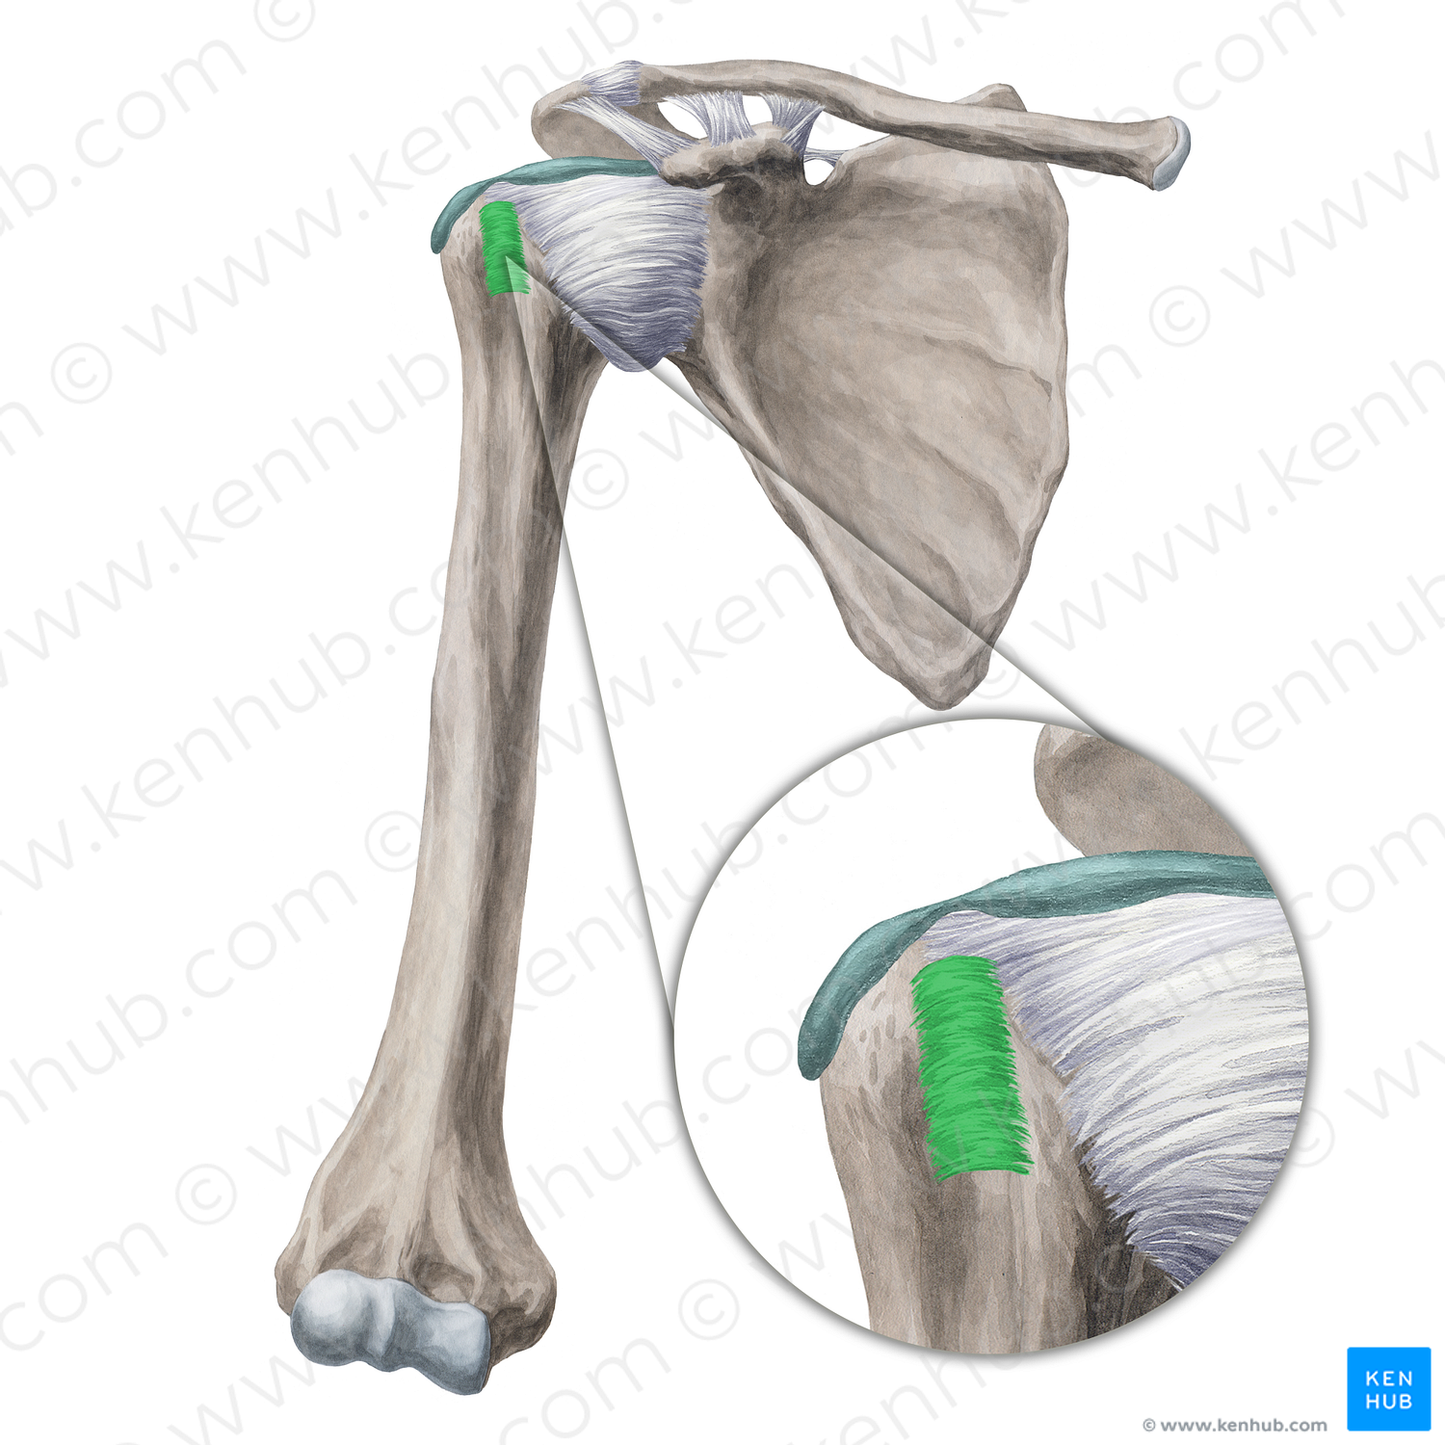 Transverse humeral ligament (#20001)